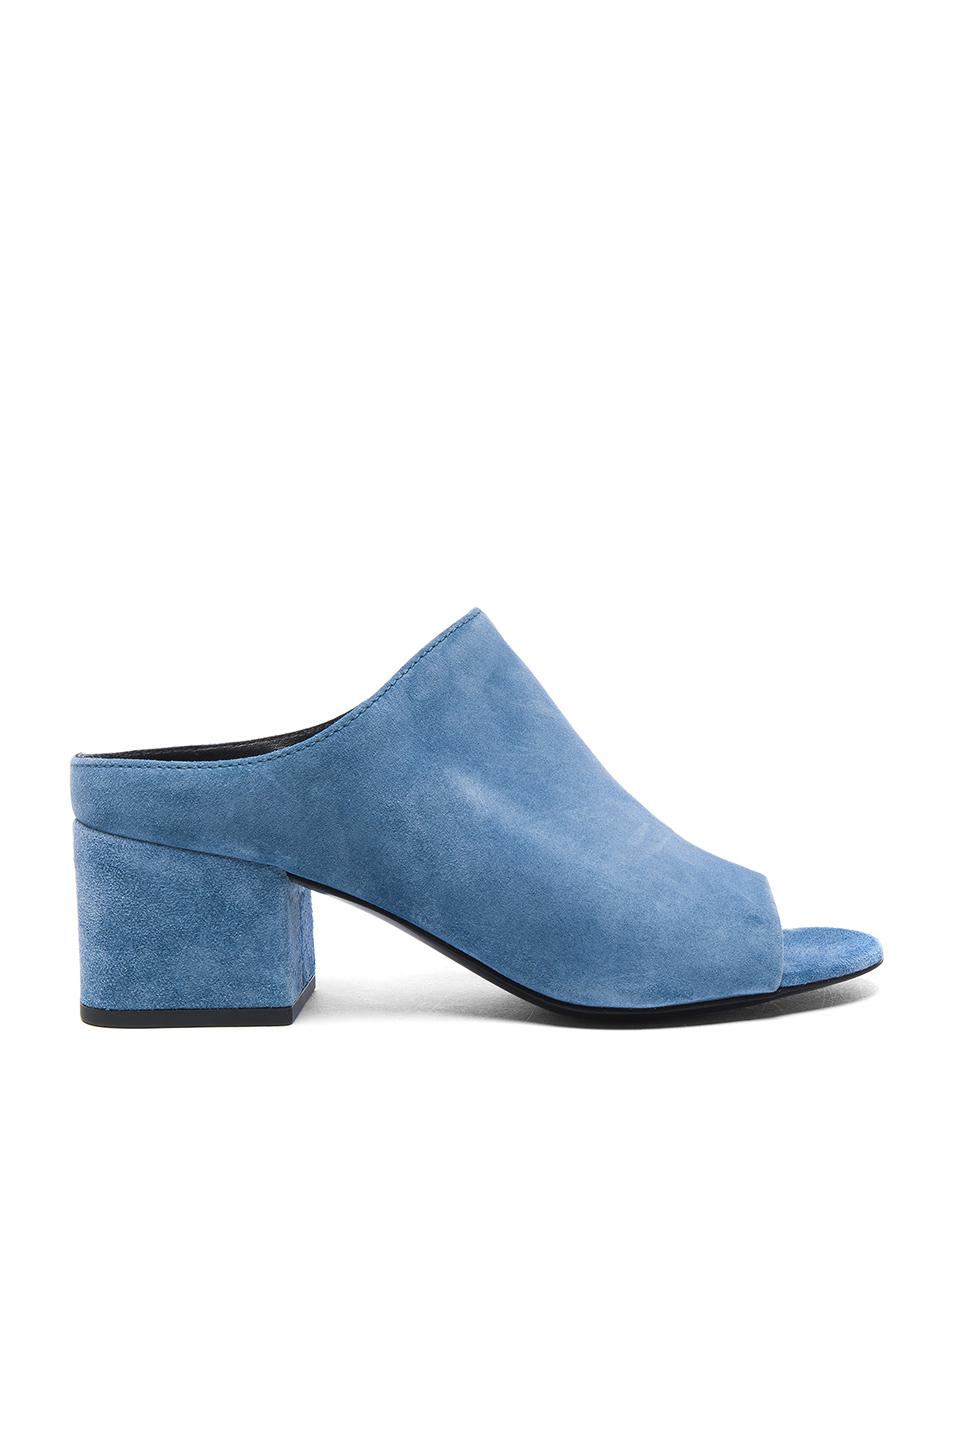 Lyst - 3.1 Phillip Lim Suede Cube Open Toe Slip Ons in Blue